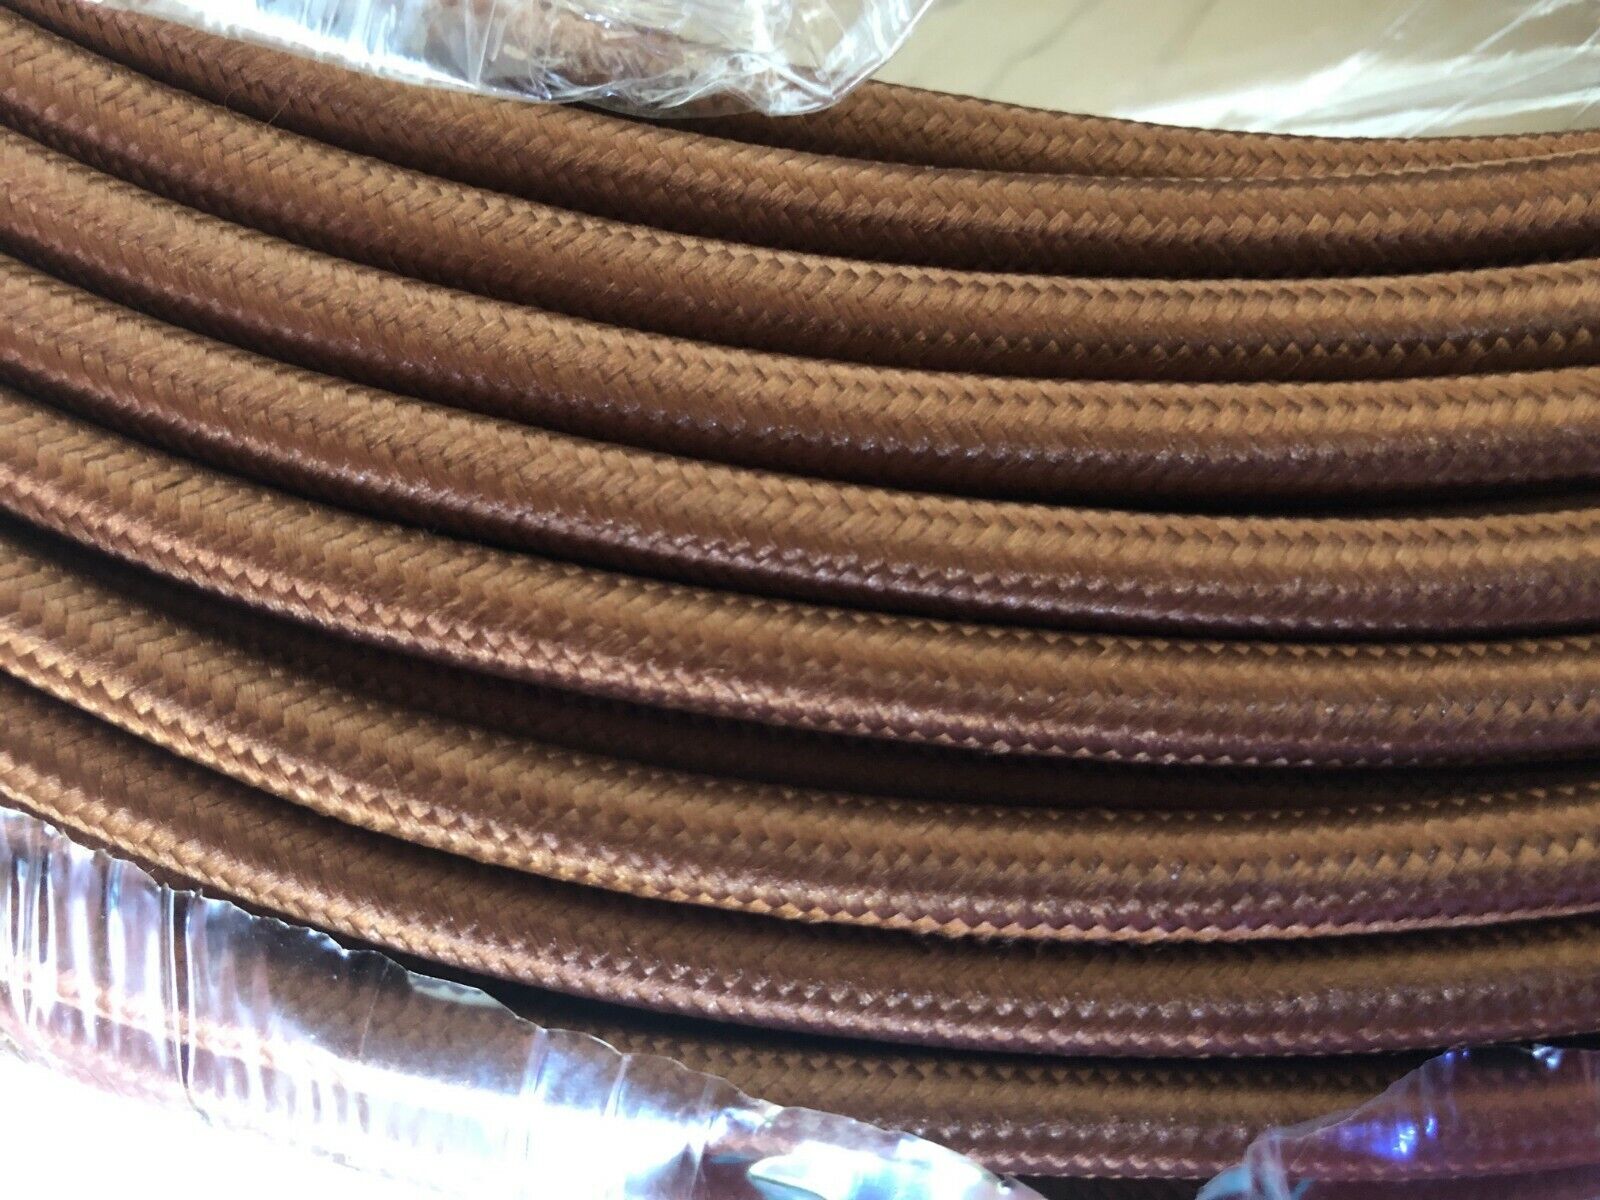  Brown Cotton Cloth Covered 2-Wire Round Cord 18ga Vintage Industrial lamp cord 